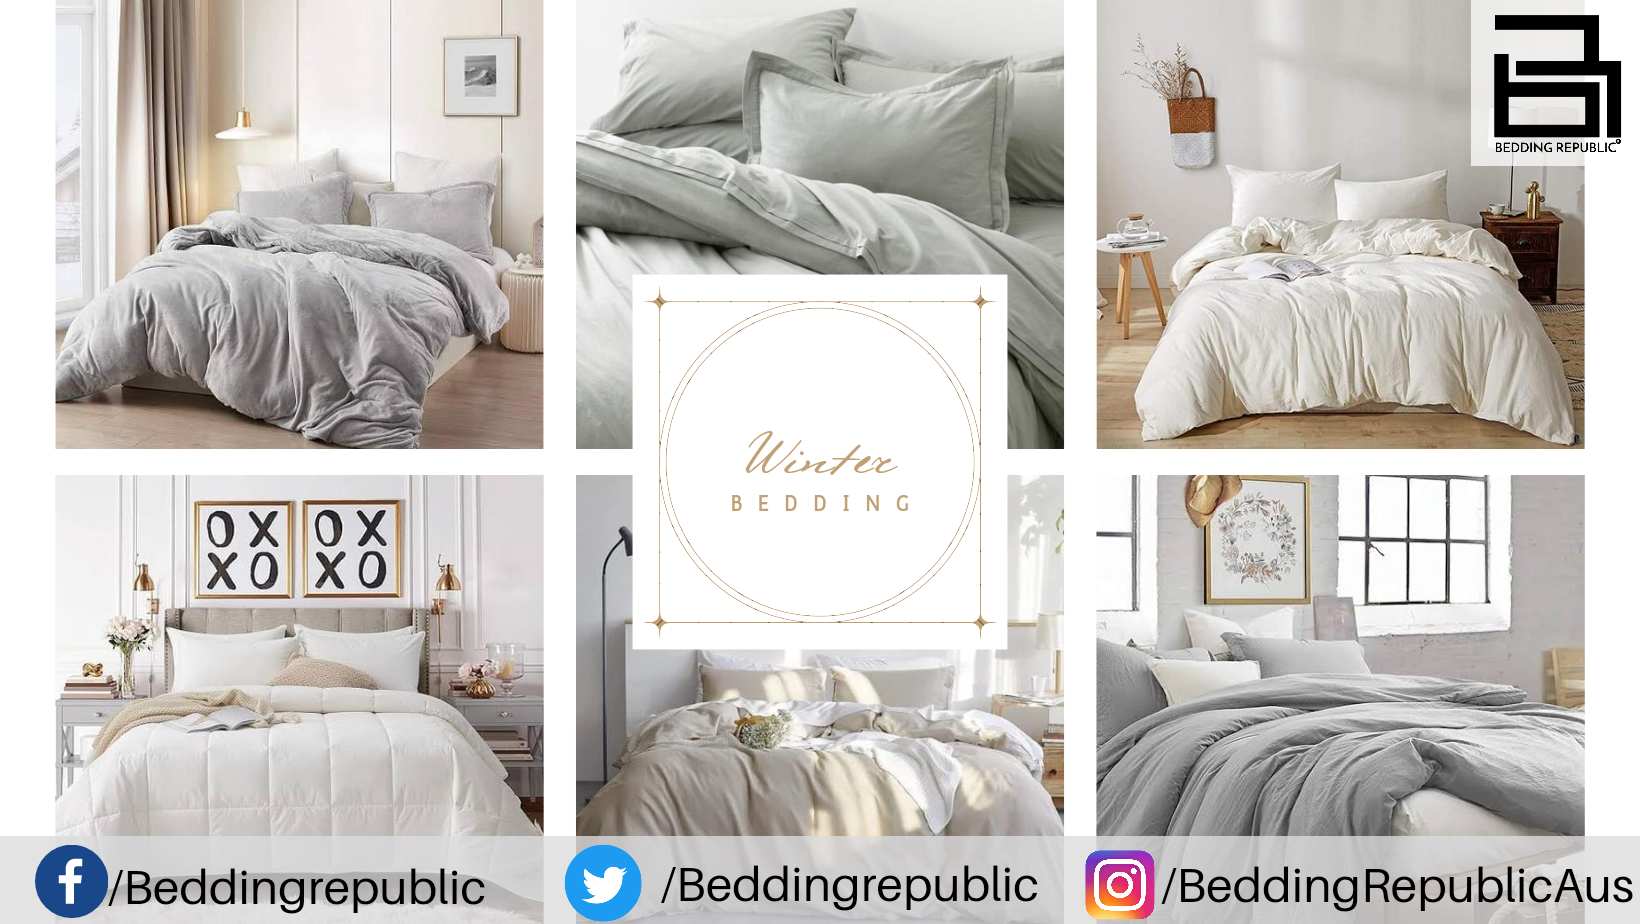 You are currently viewing Aussie Winter Bedding: The Best Materials to Keep You Snug as a Bug